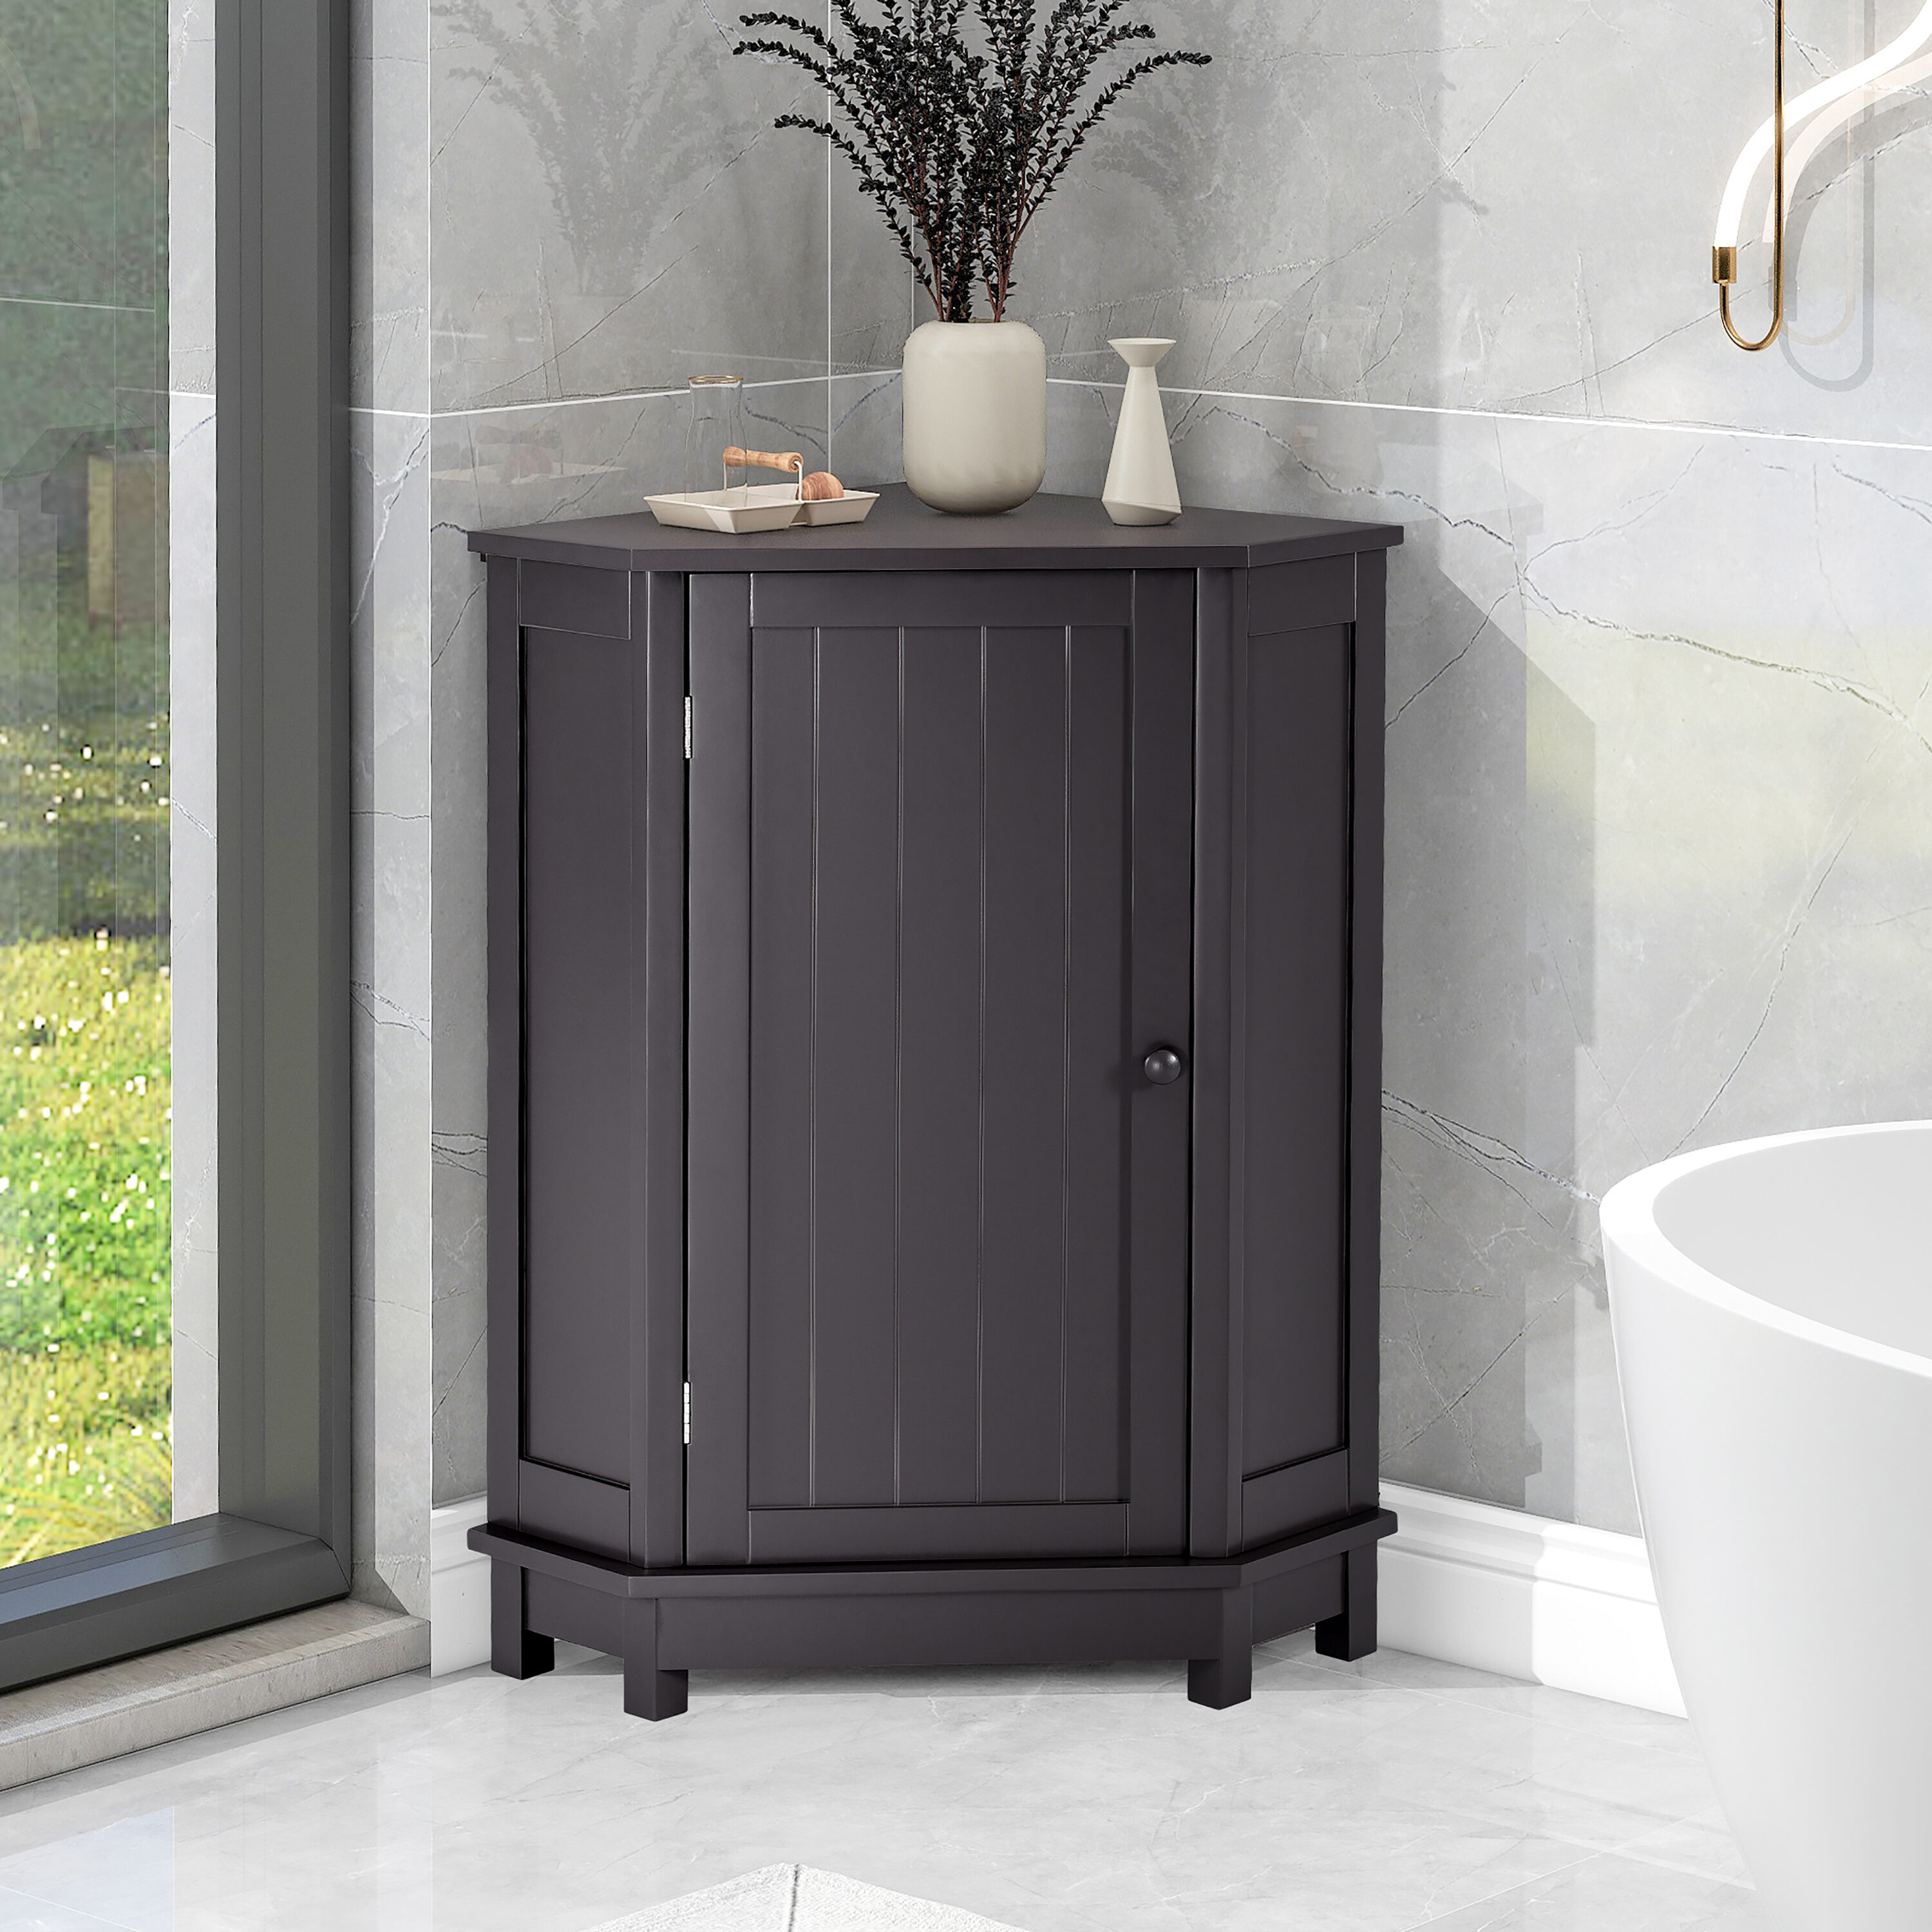 Bathroom Freestanding Storage Cabinet with Shelves Over Toilet, White -  ModernLuxe